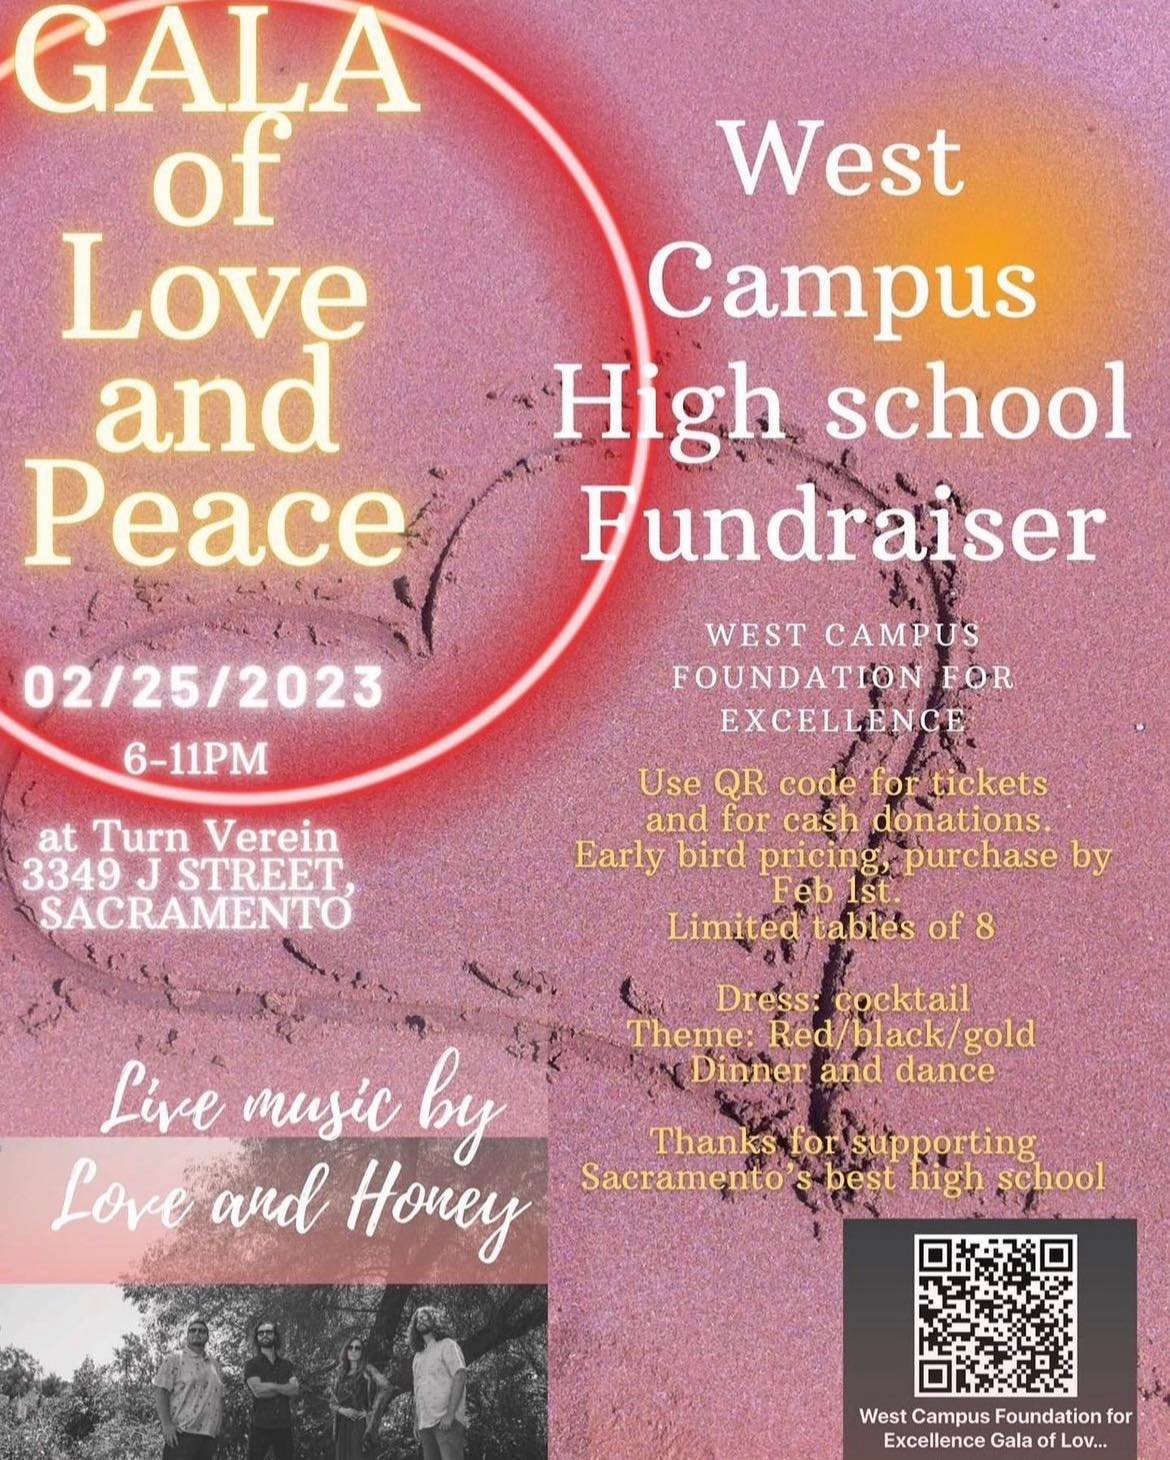 Gala of Love and Peace in East Sacramento